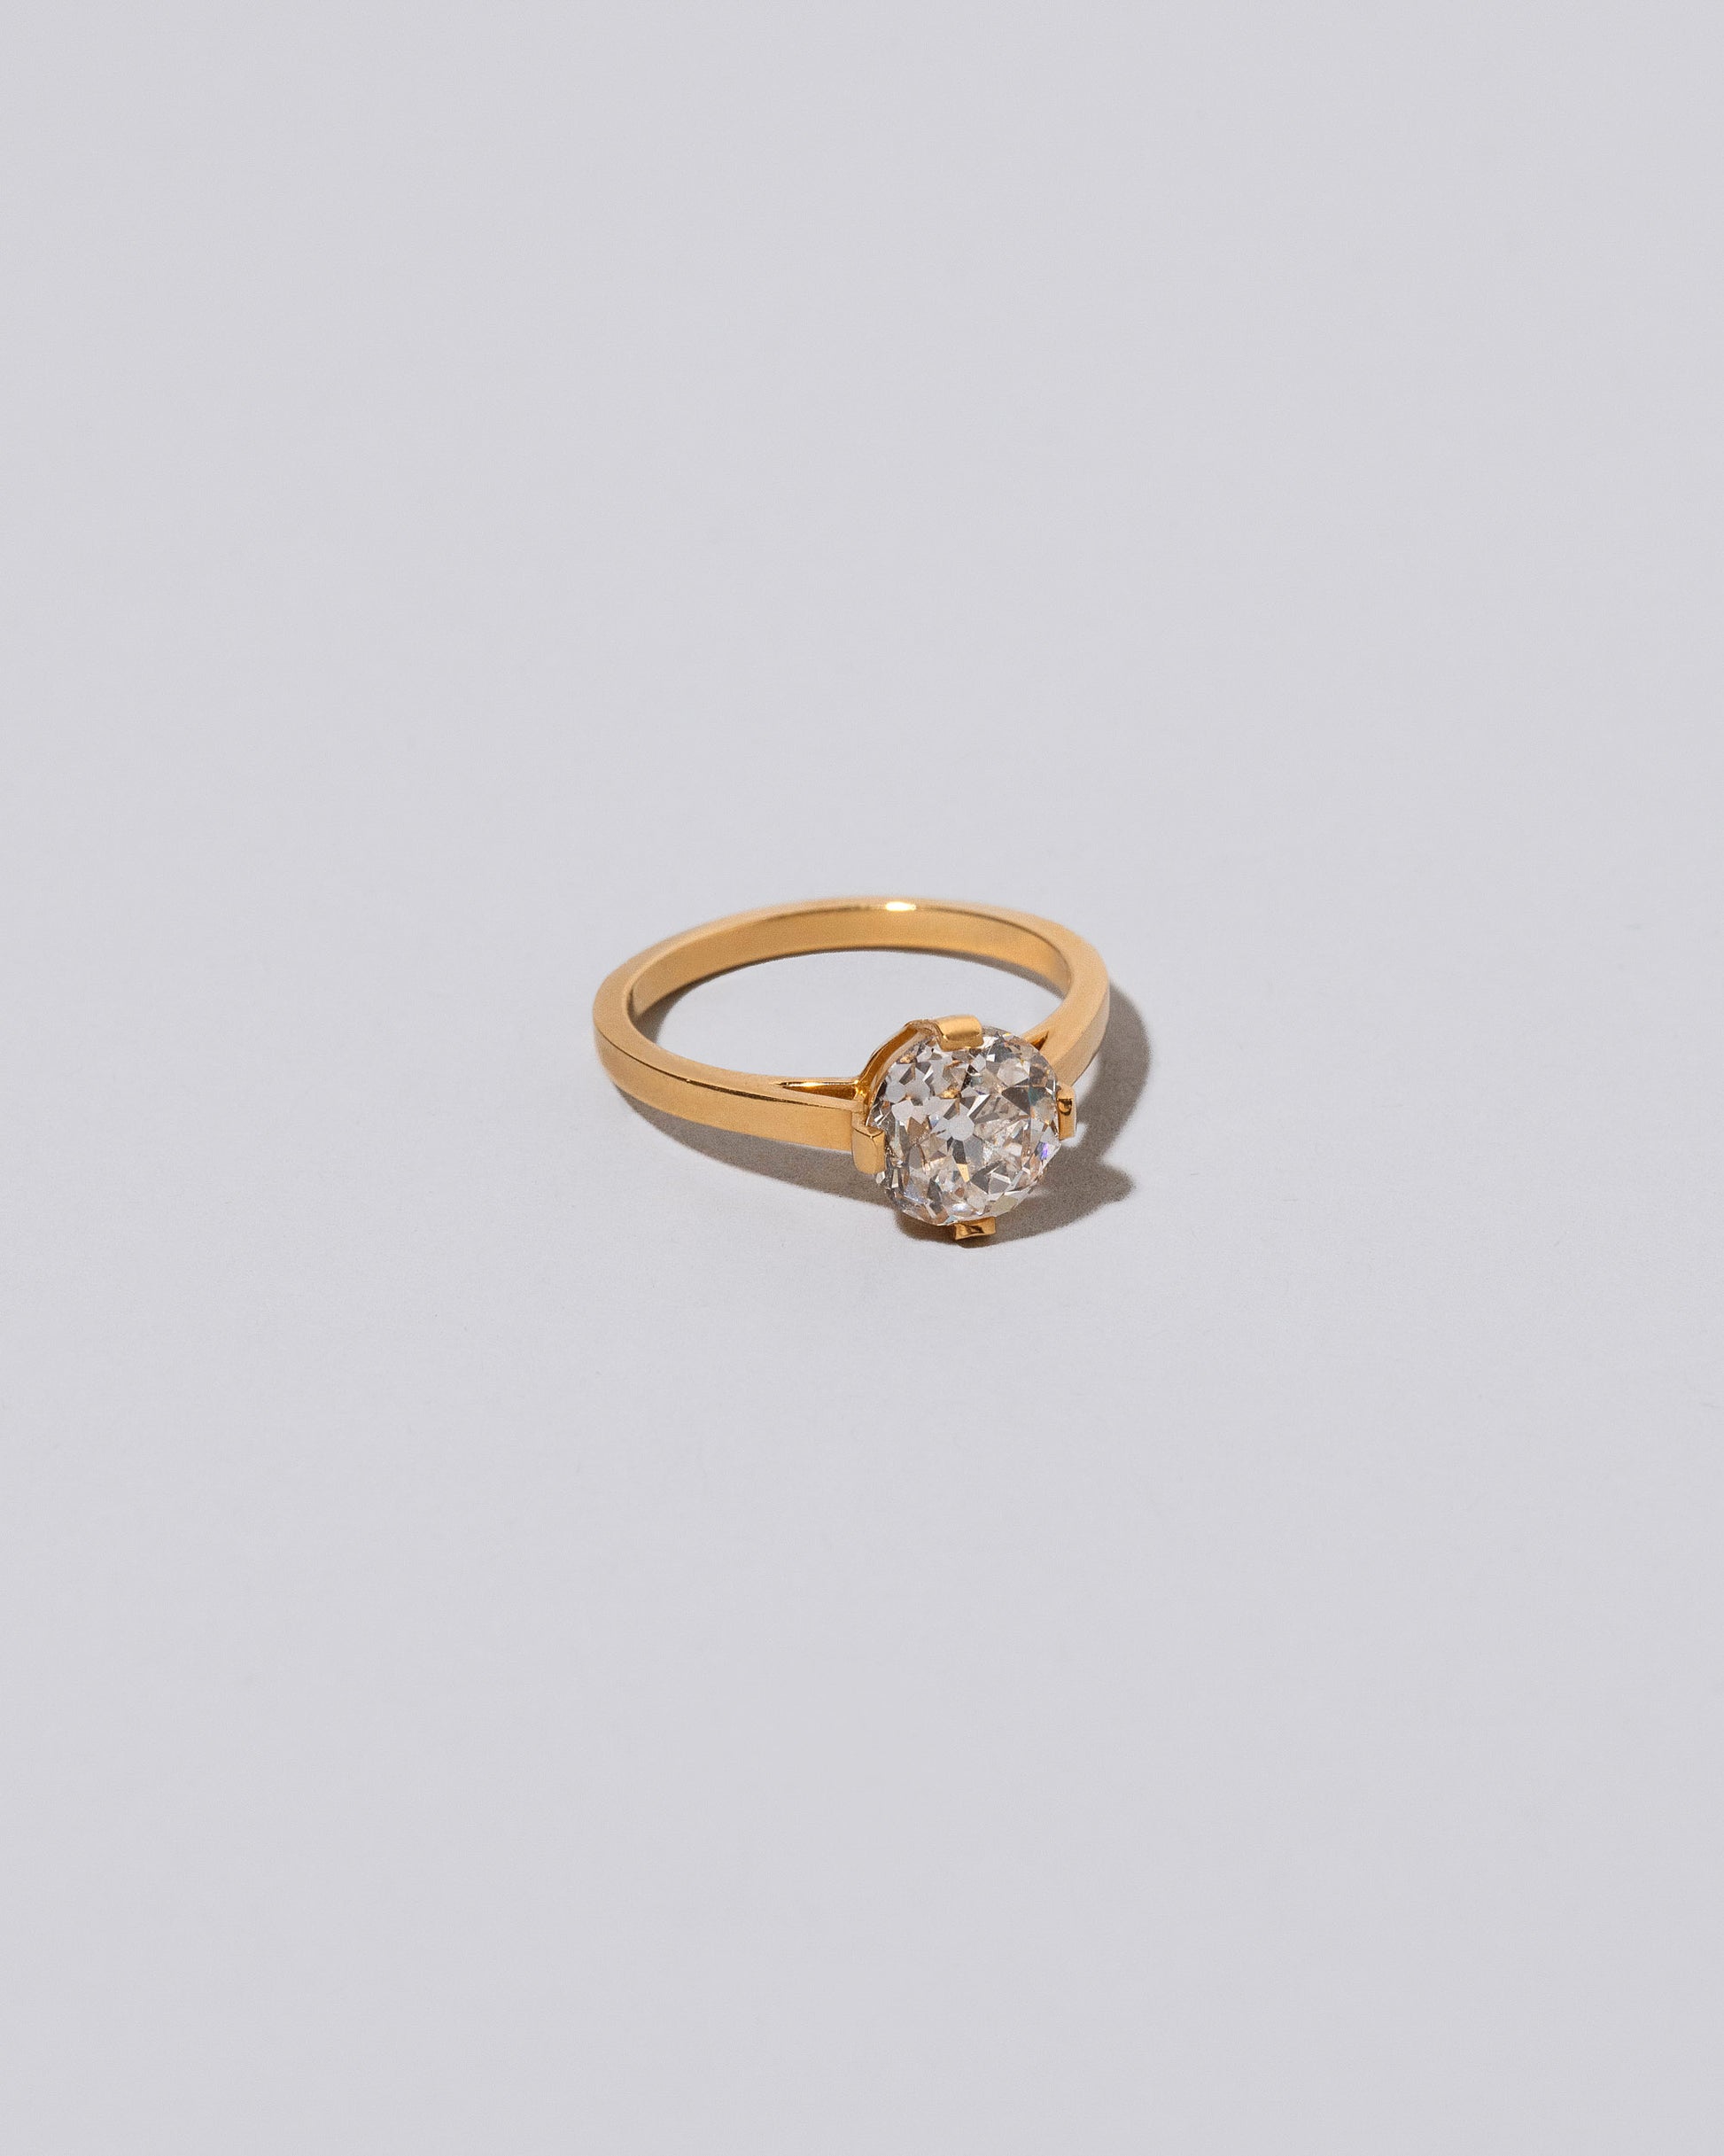 View from the side of the White Diamond Barragán Ring on light color background.